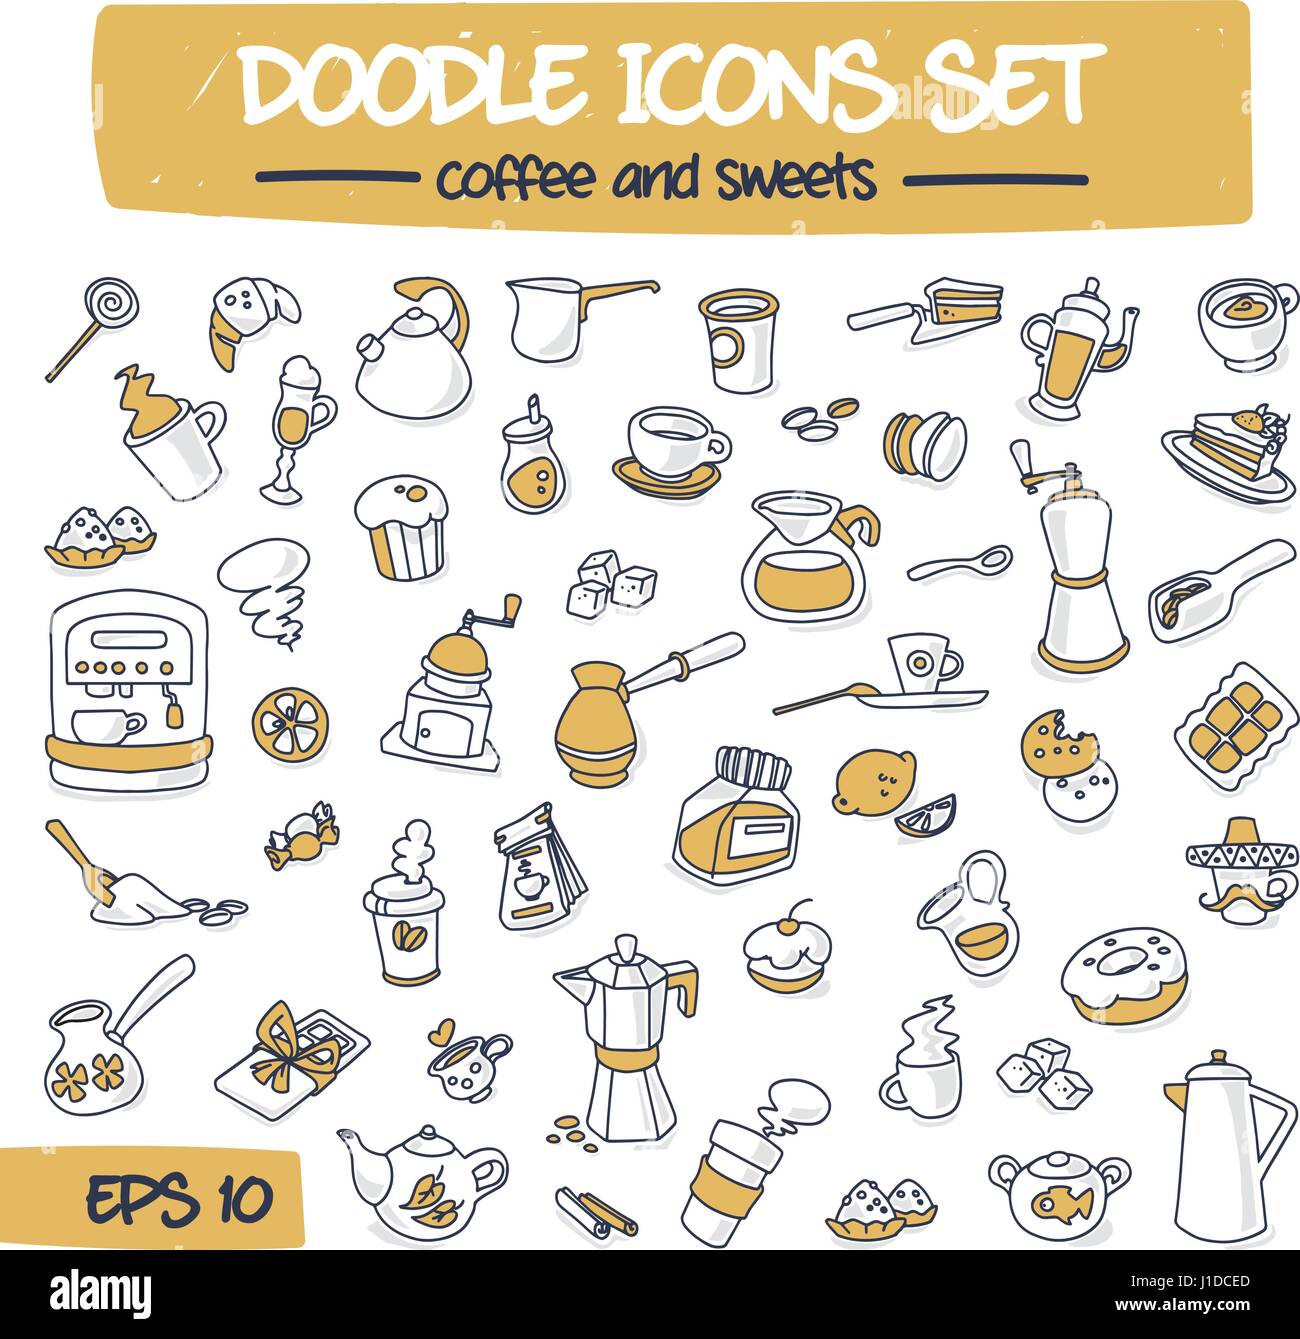 Thin Doodle Icons Set - Coffee and Sweets. Stock Vector